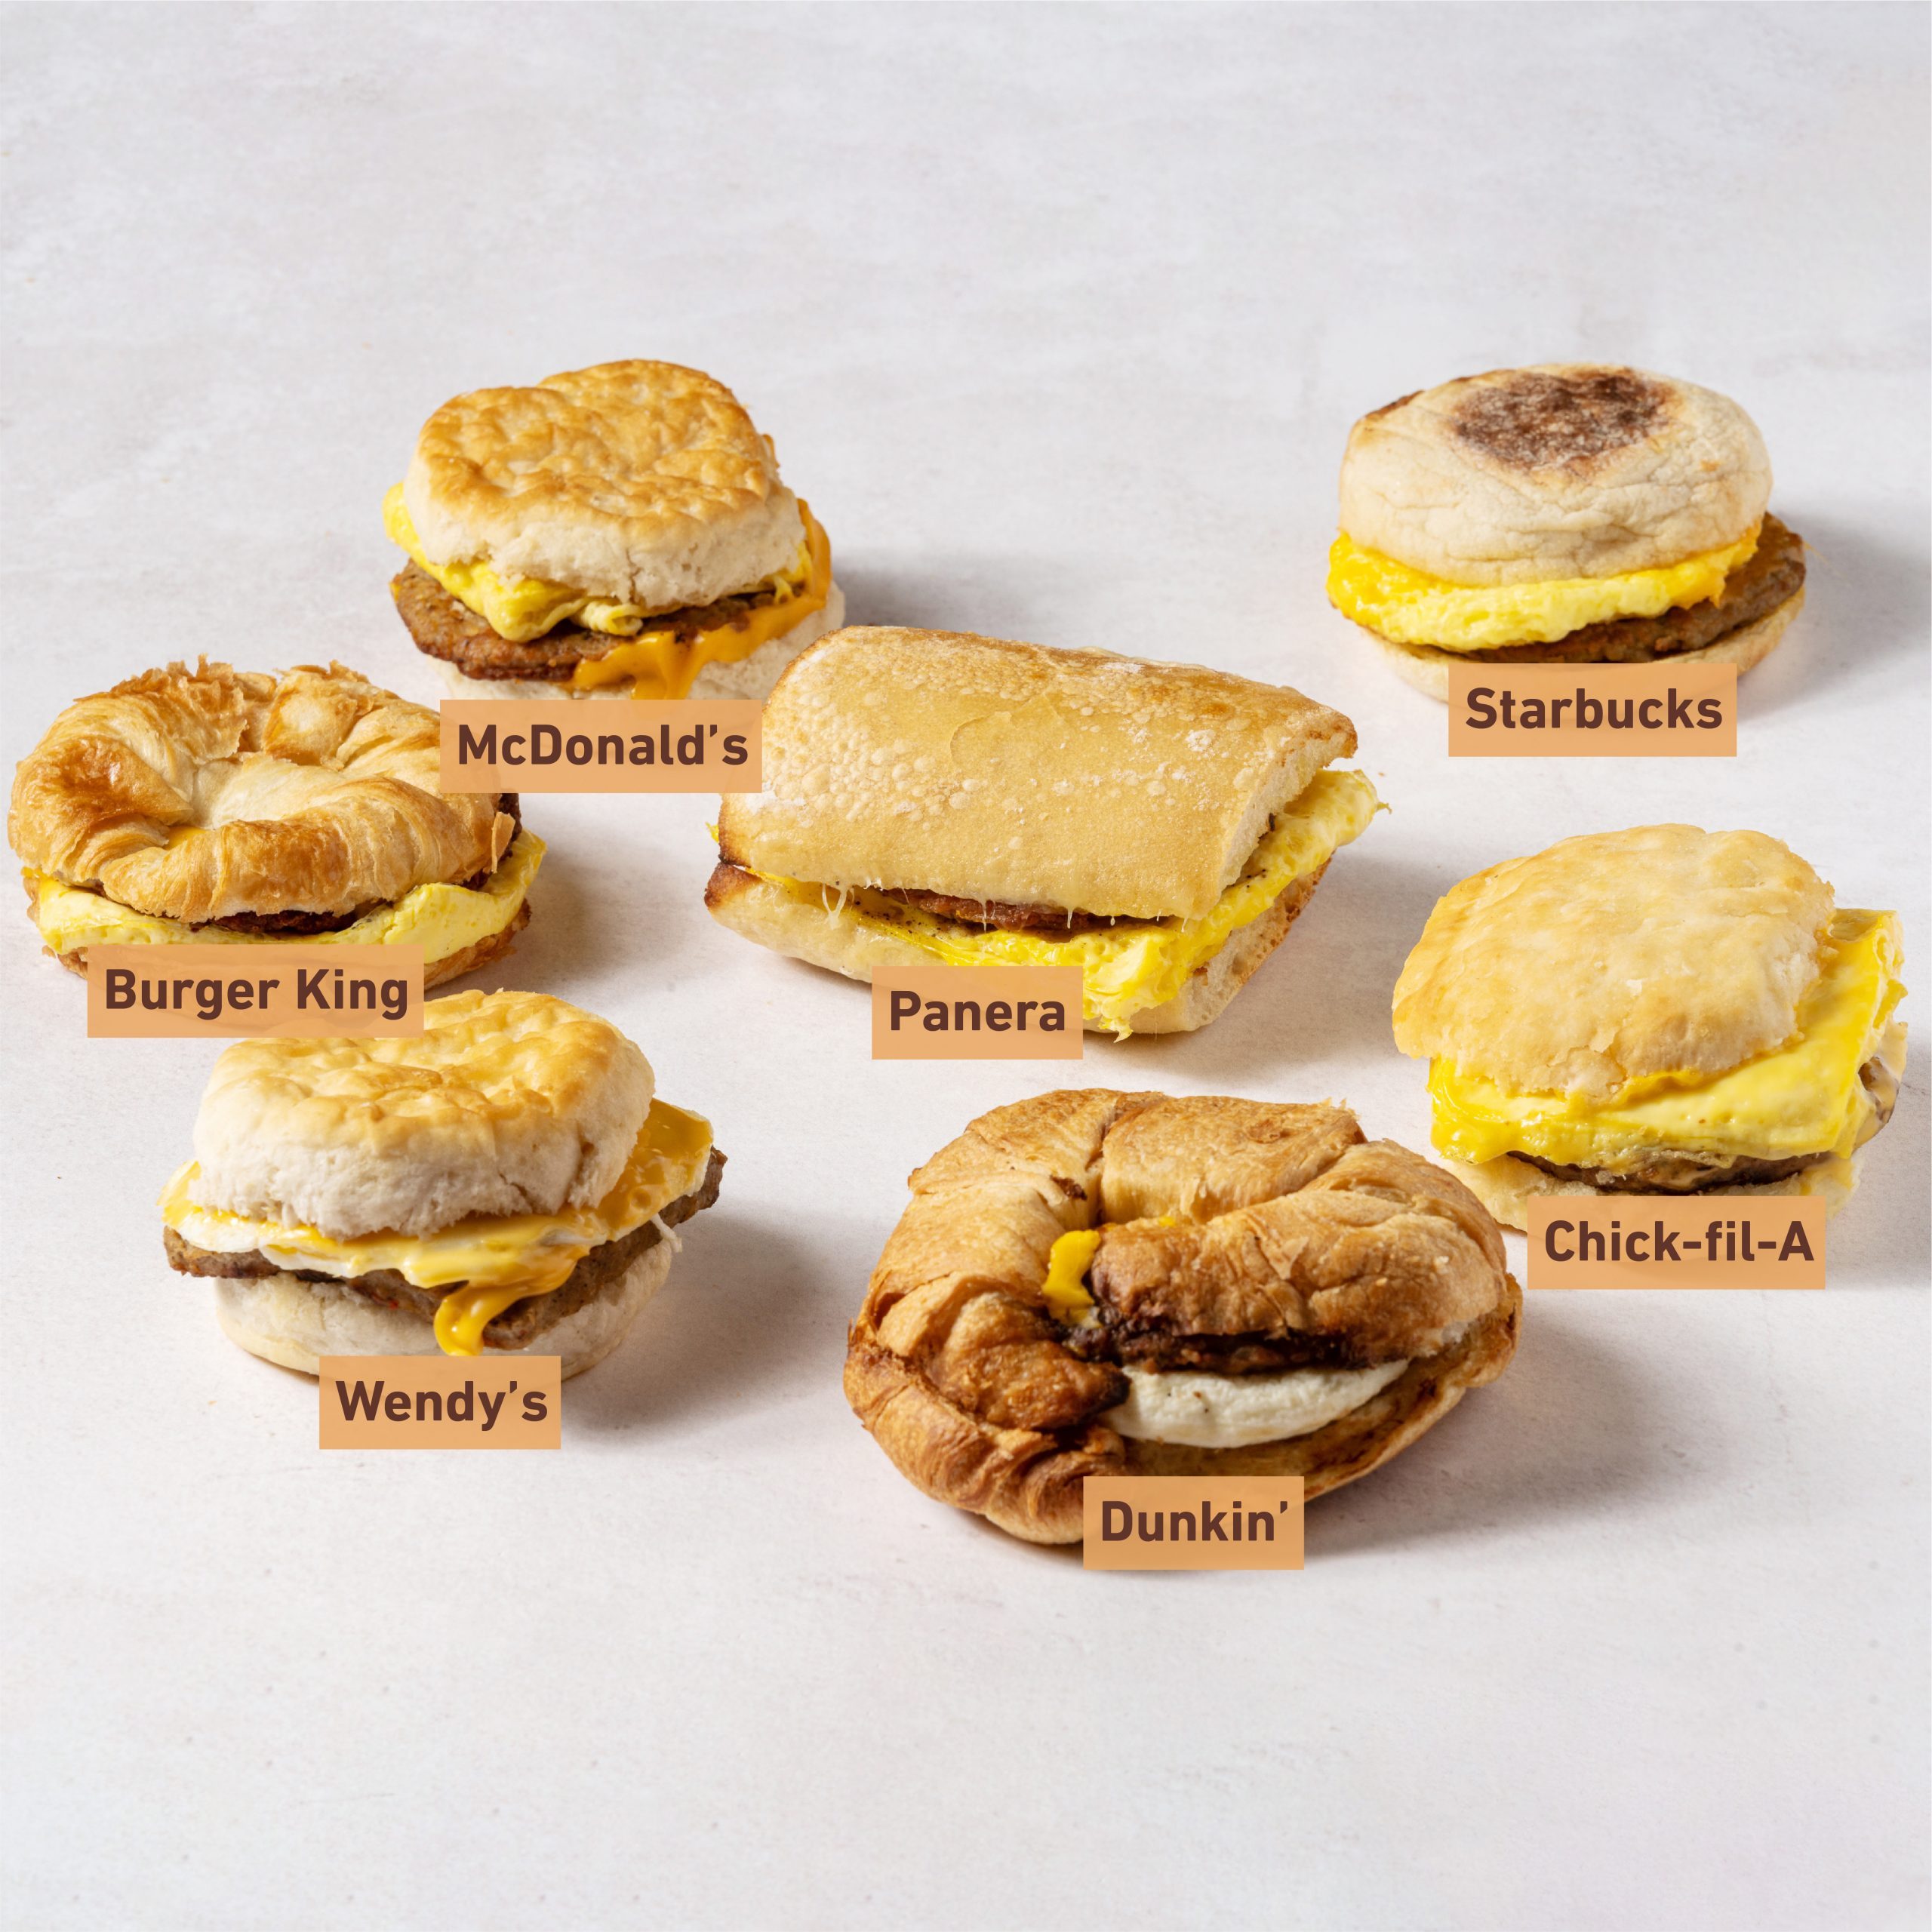 https://www.tasteofhome.com/wp-content/uploads/2022/04/fast-food-breakfast-sandwiches-labeled-SQ-02-scaled.jpg